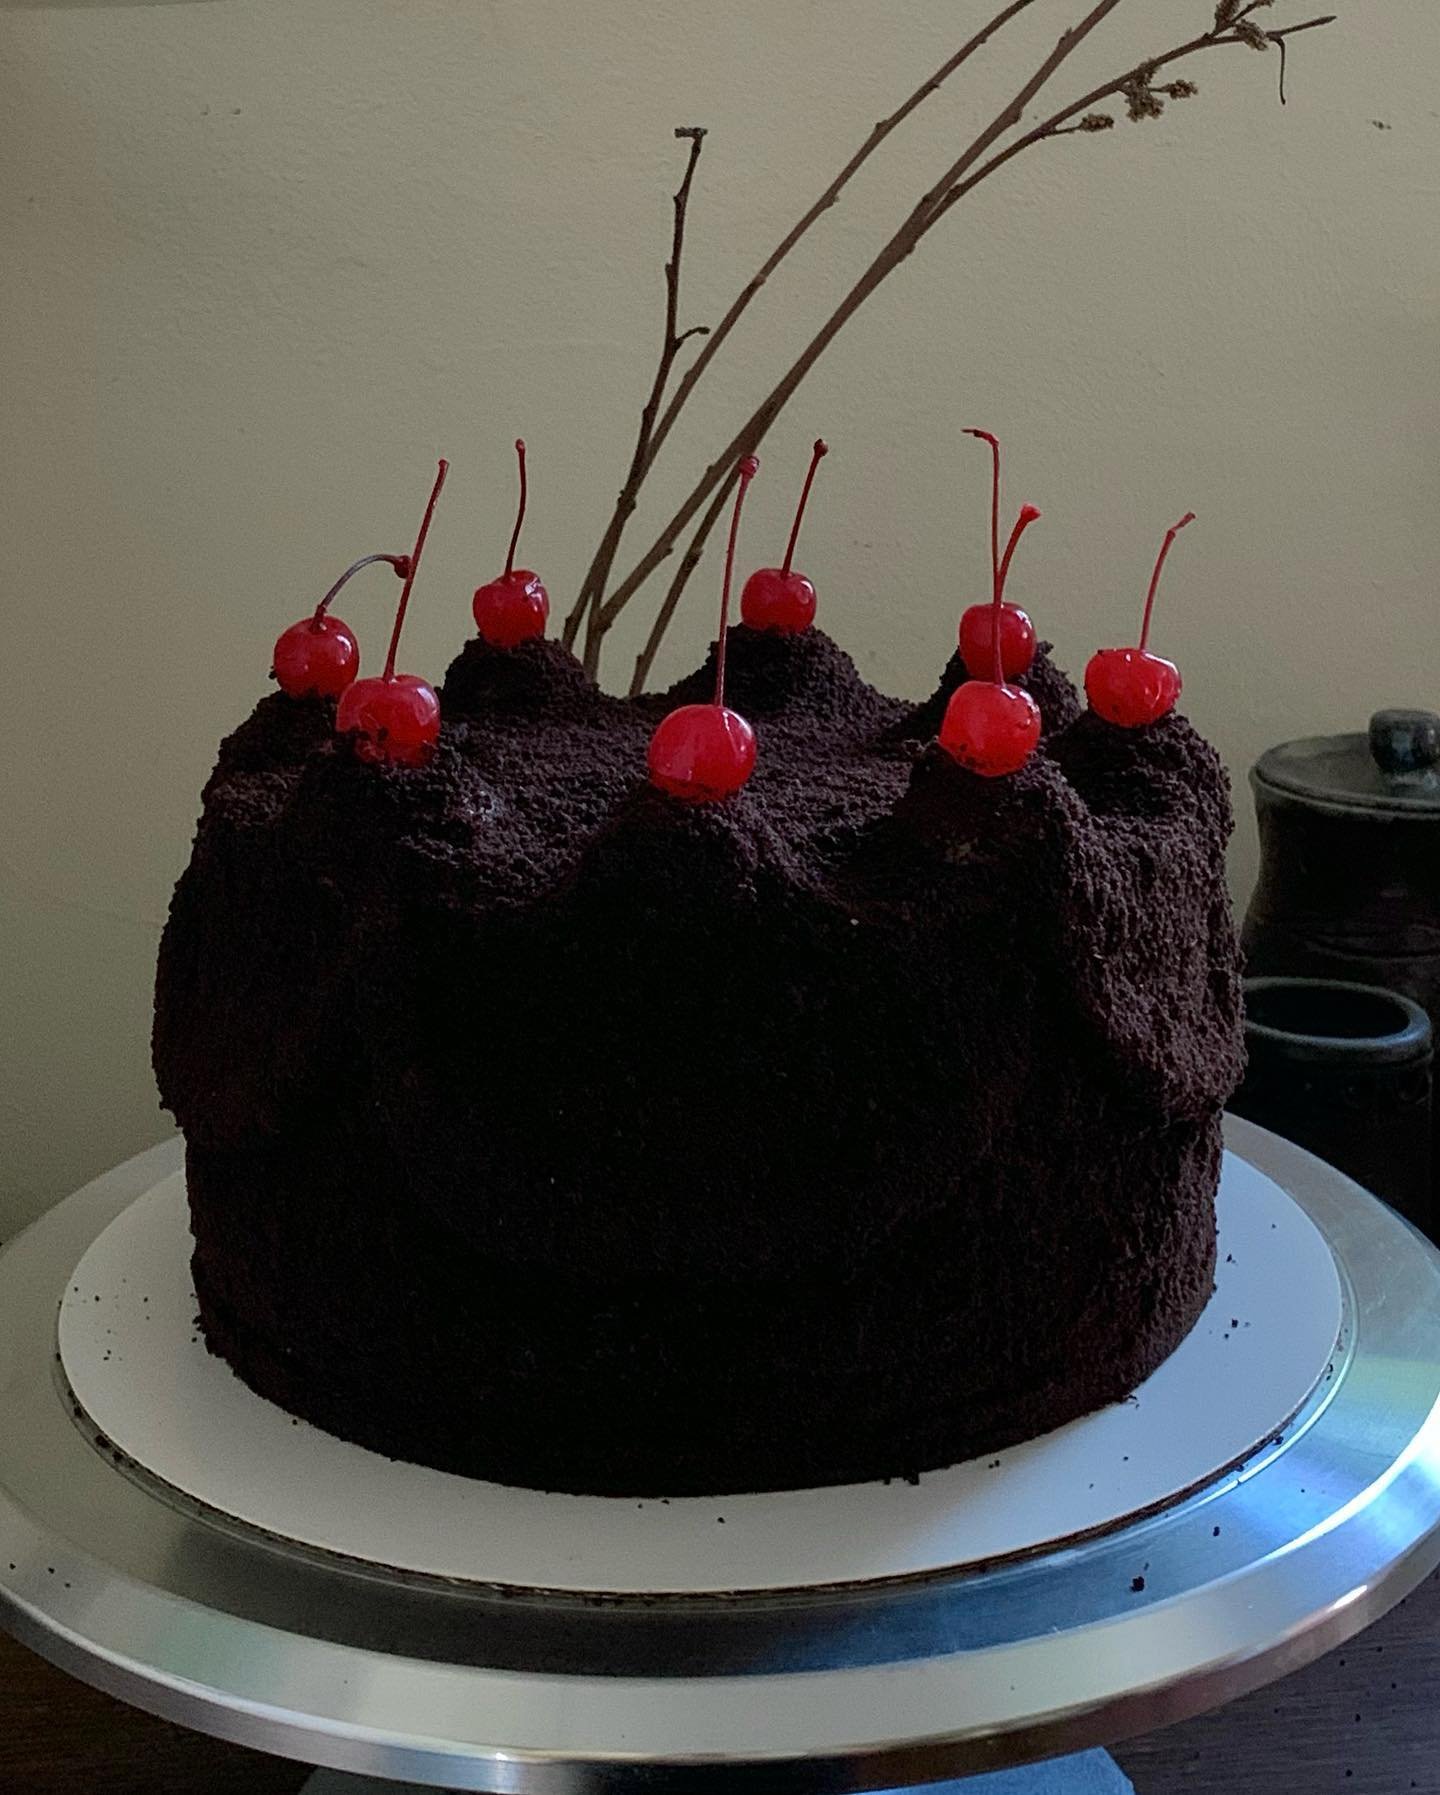 Inspiration from @paris.starn 
Cake recipe inspired by &quot;The Bear&quot;